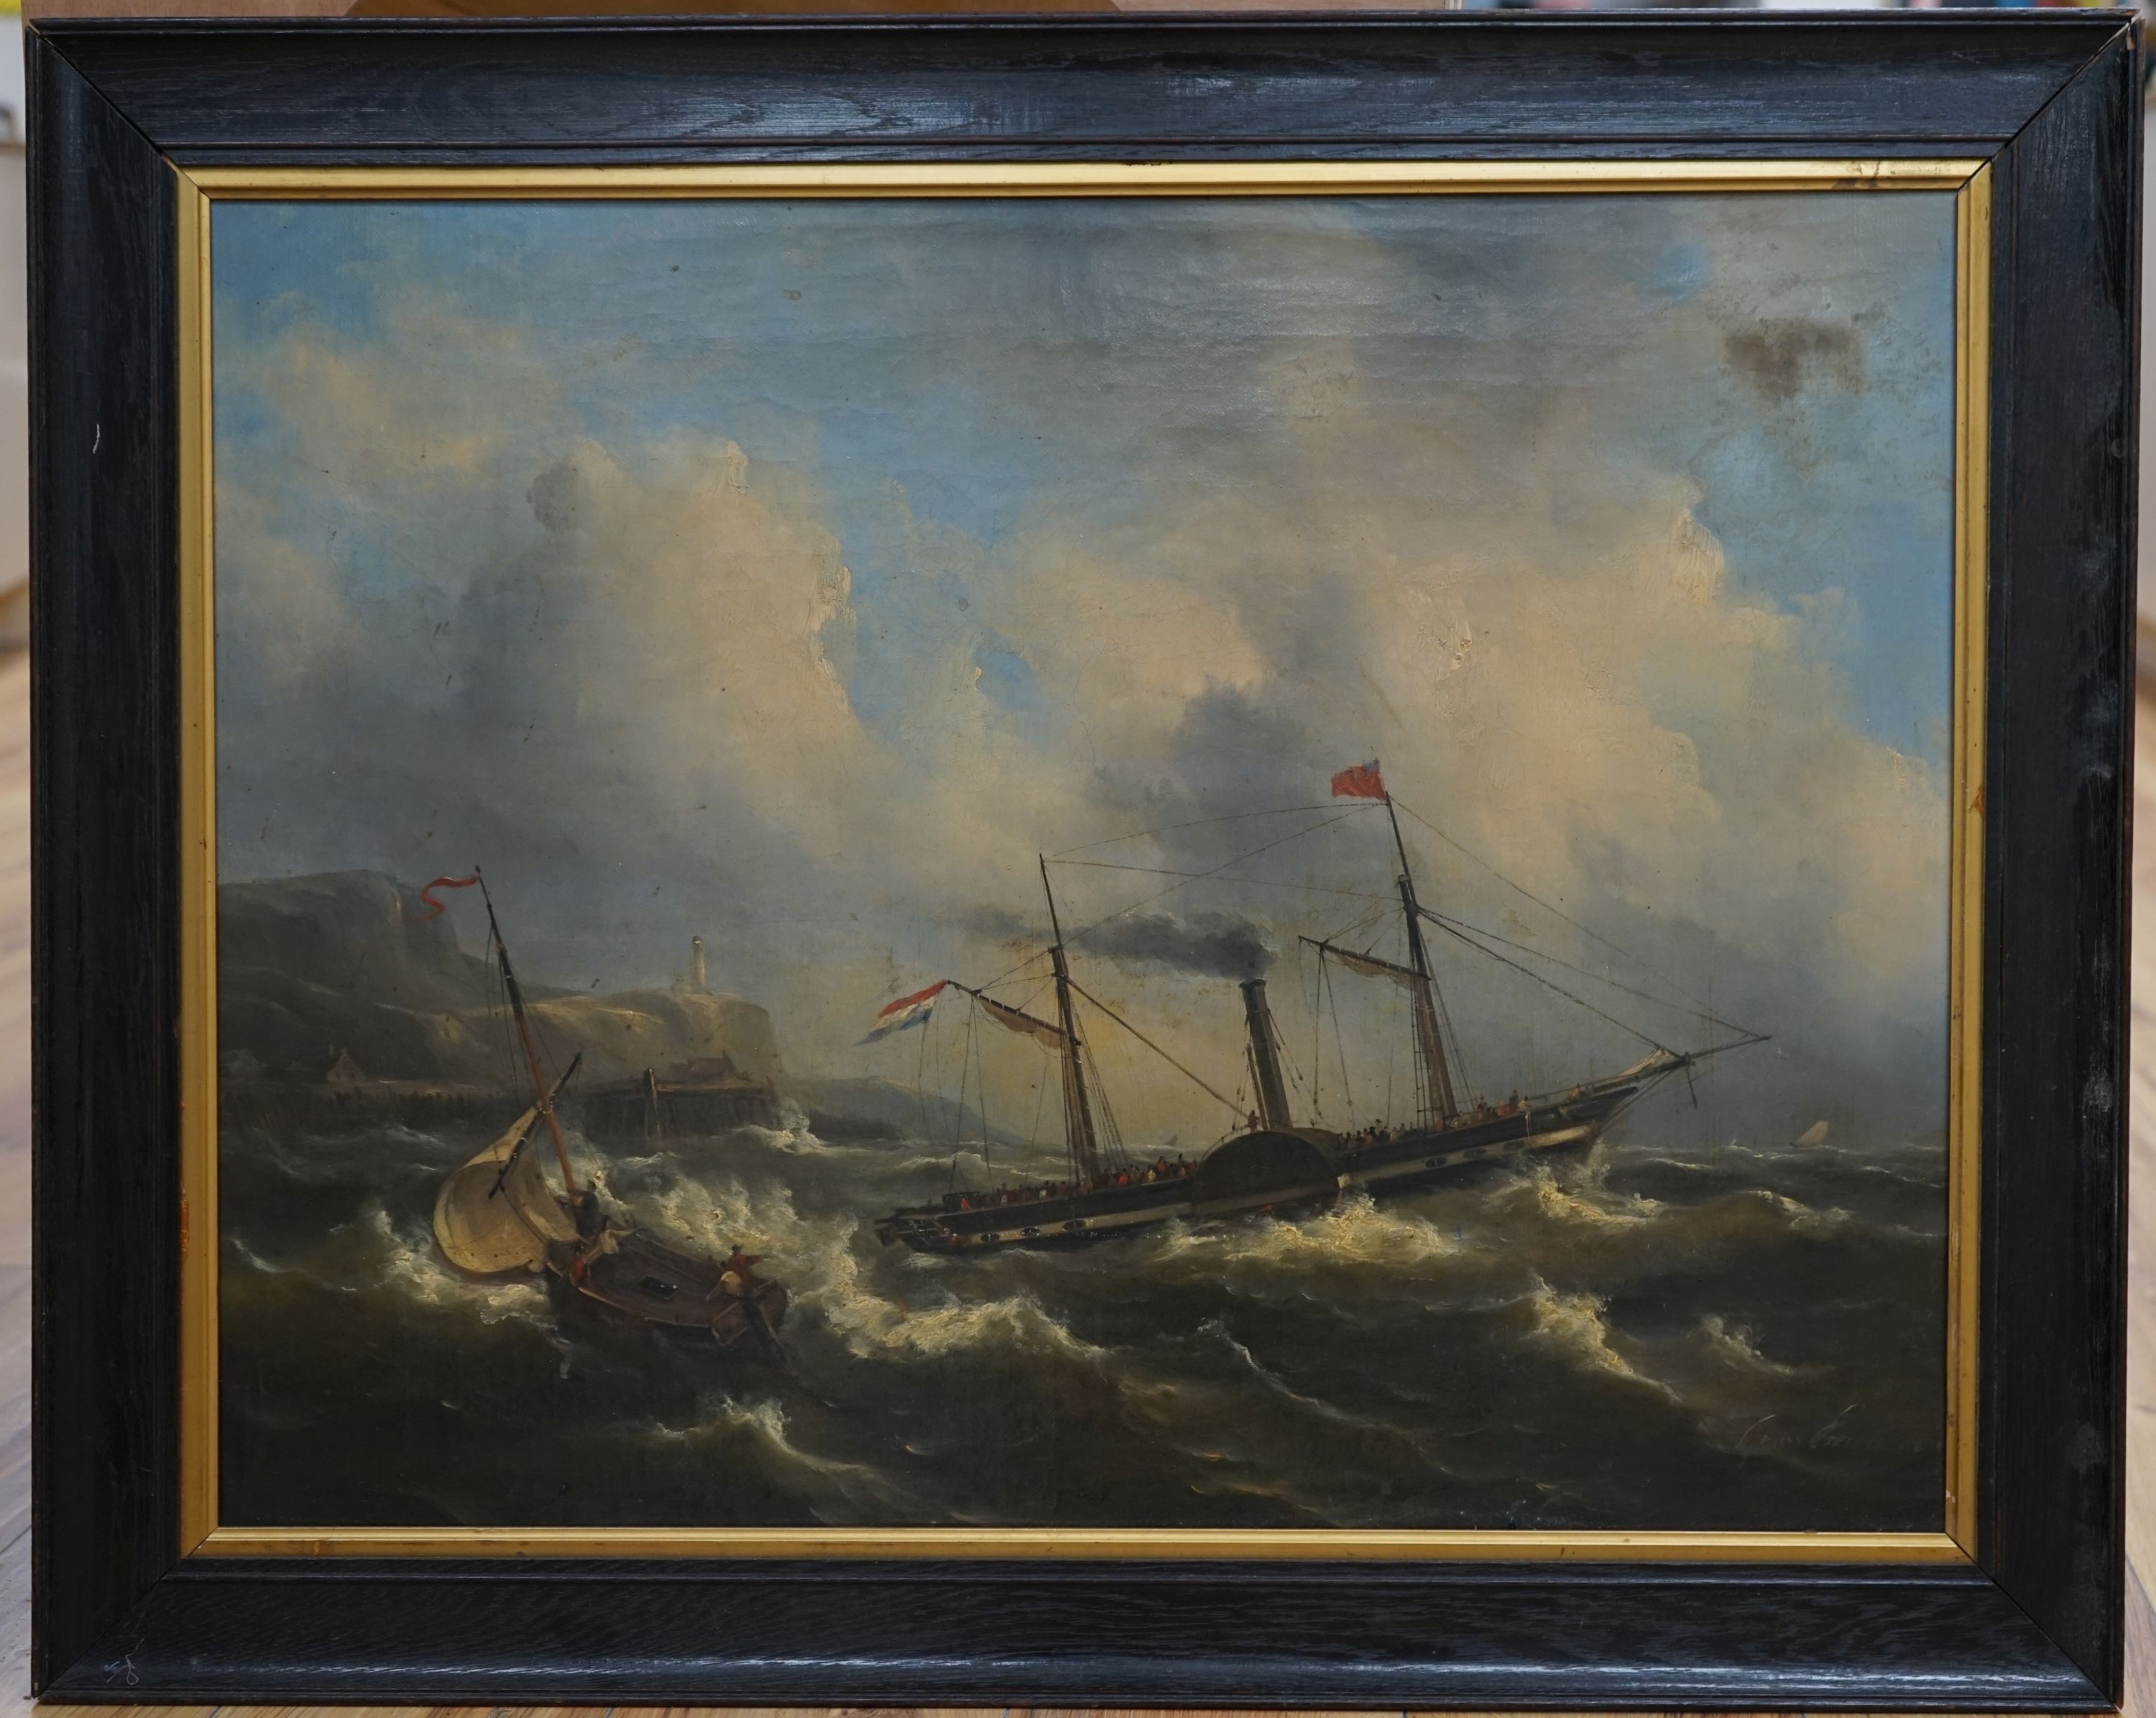 Marine School (19th century), oil on canvas, Dutch paddle steamer and sailing boat in rough seas off the shore, a lighthouse on the cliffs, indistinctly signed and dated, 54 x 70cm